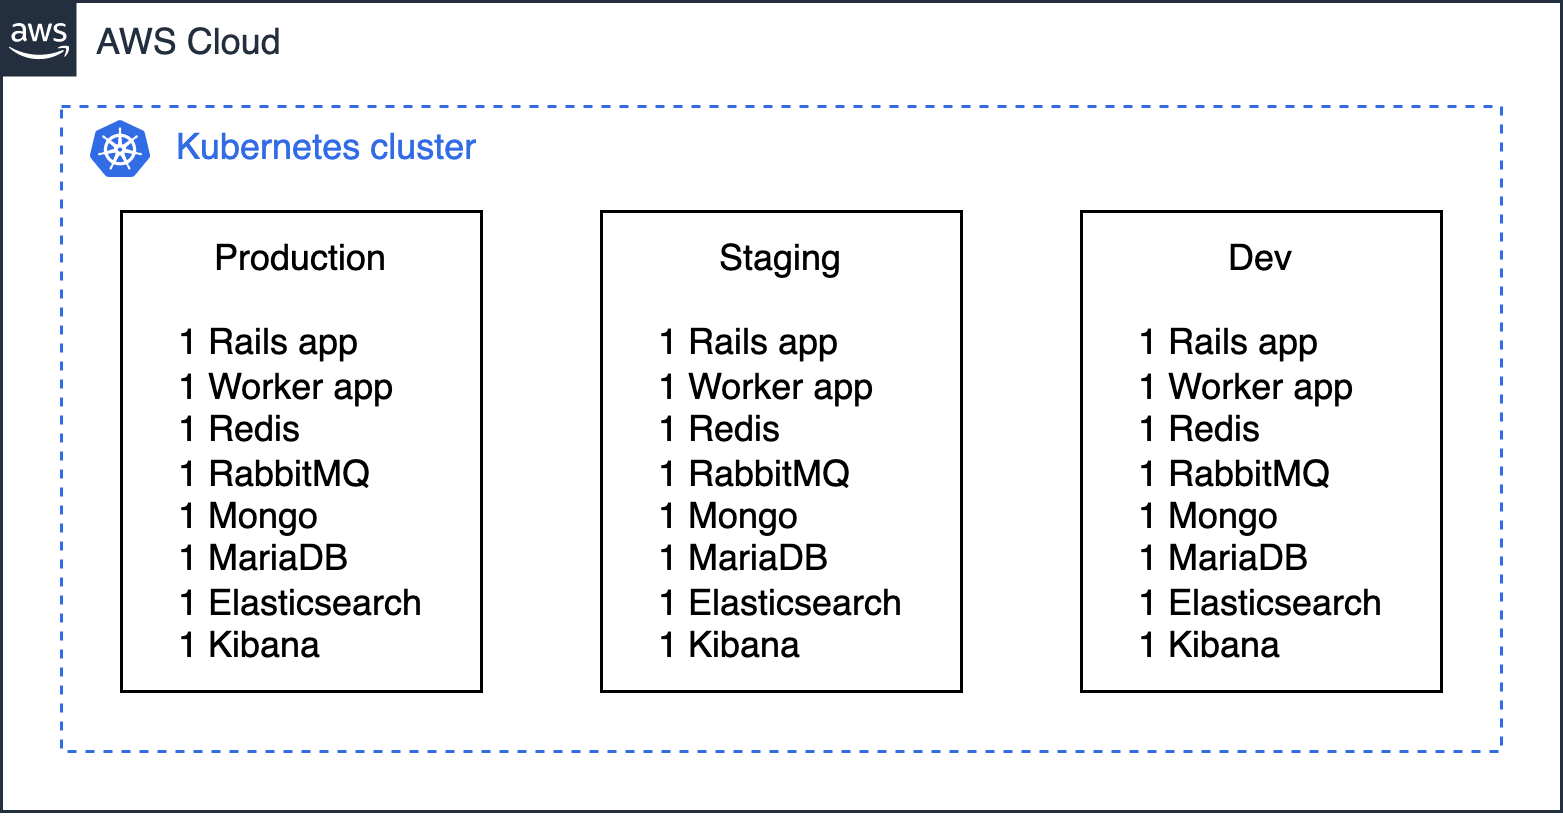 Schema with 1 Kubernetes cluster for the production, staging and dev environments